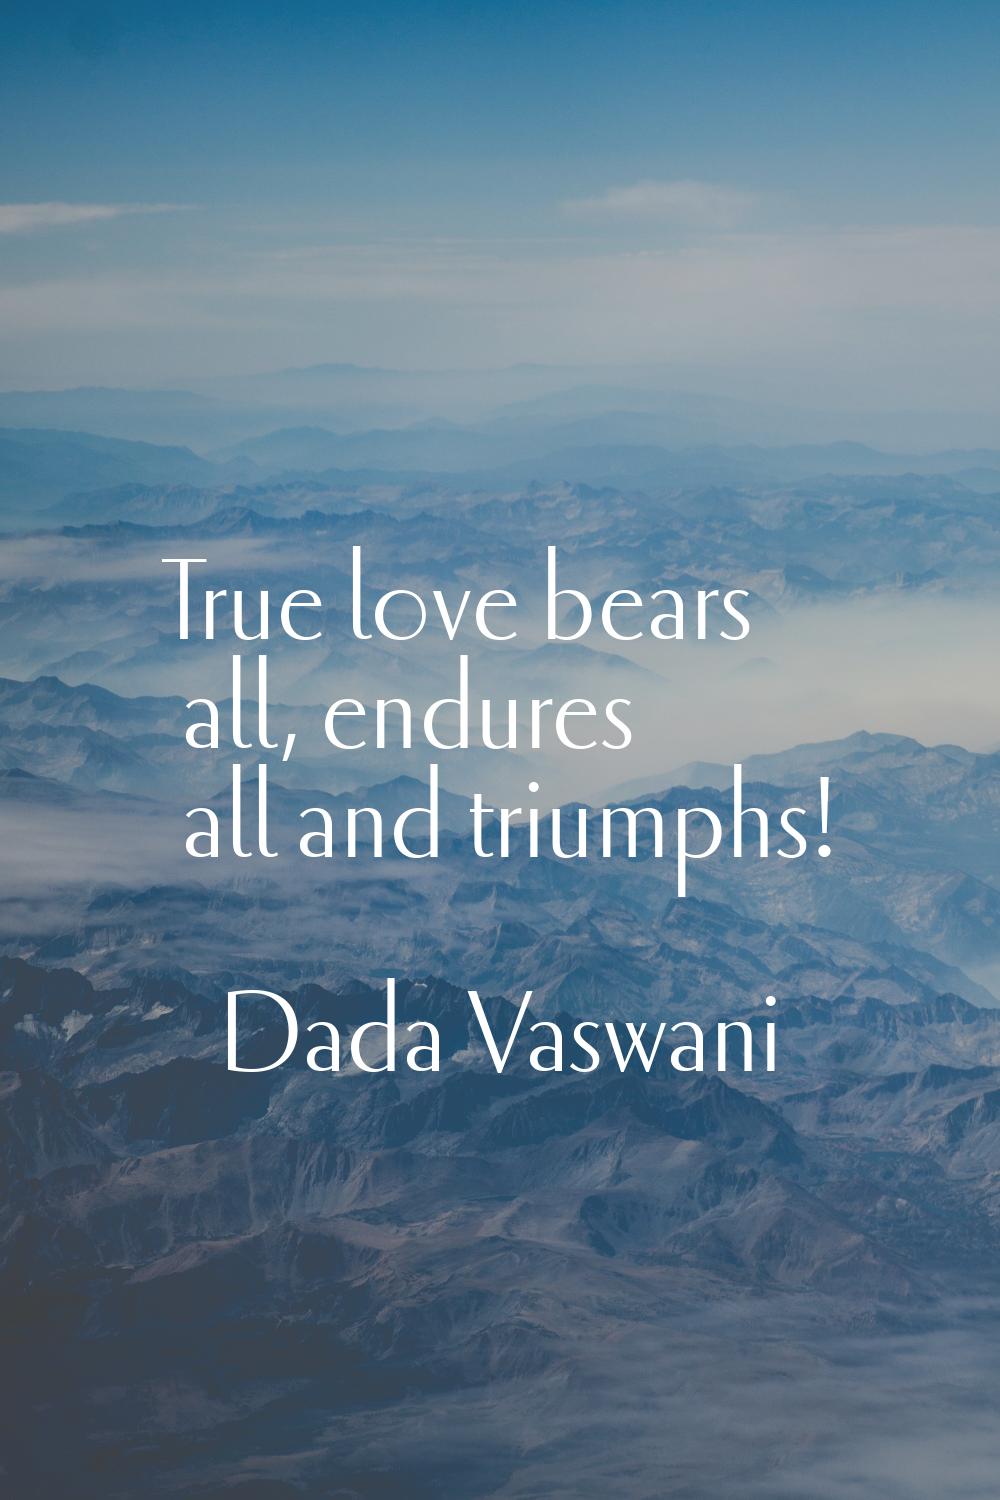 True love bears all, endures all and triumphs!